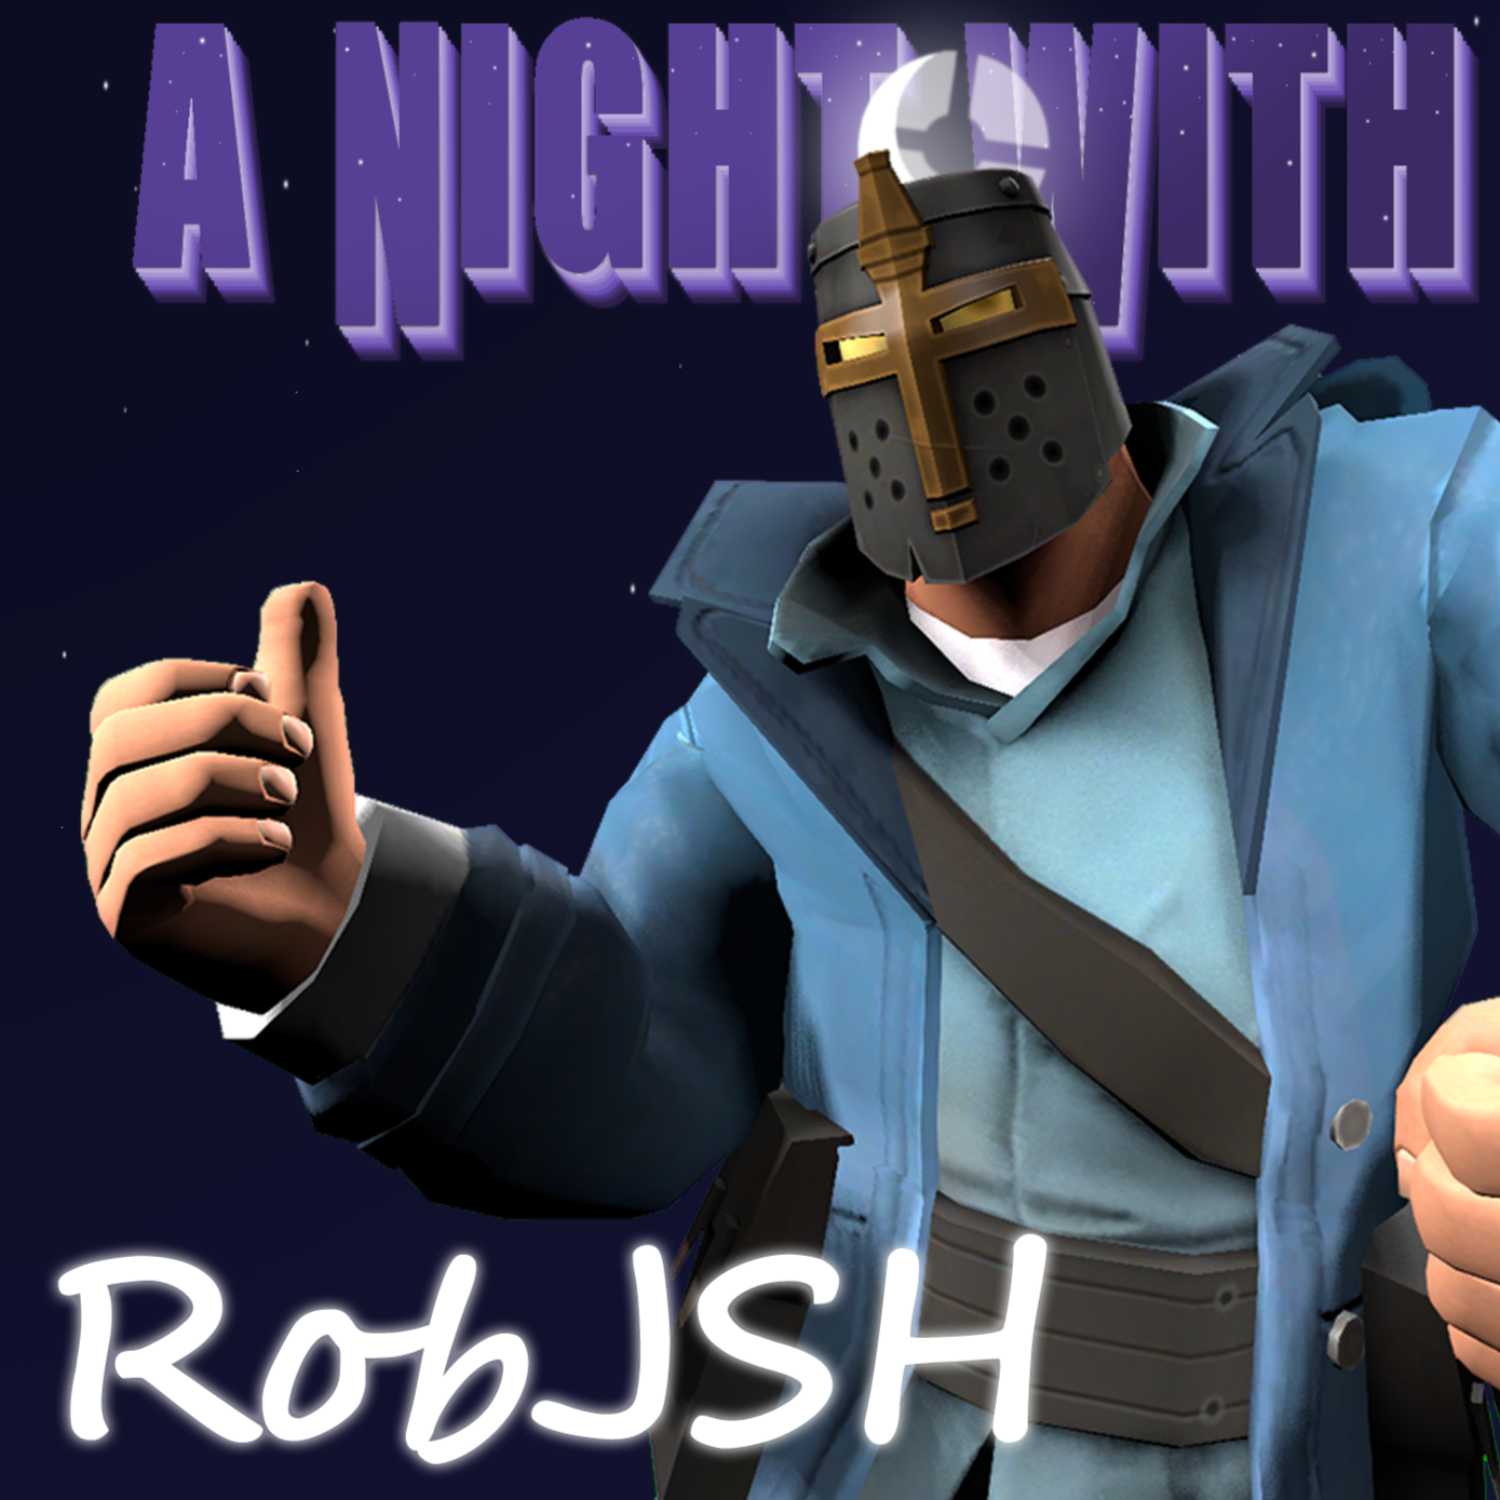 A Night With: RobJSH "The Pioneer Soldier"